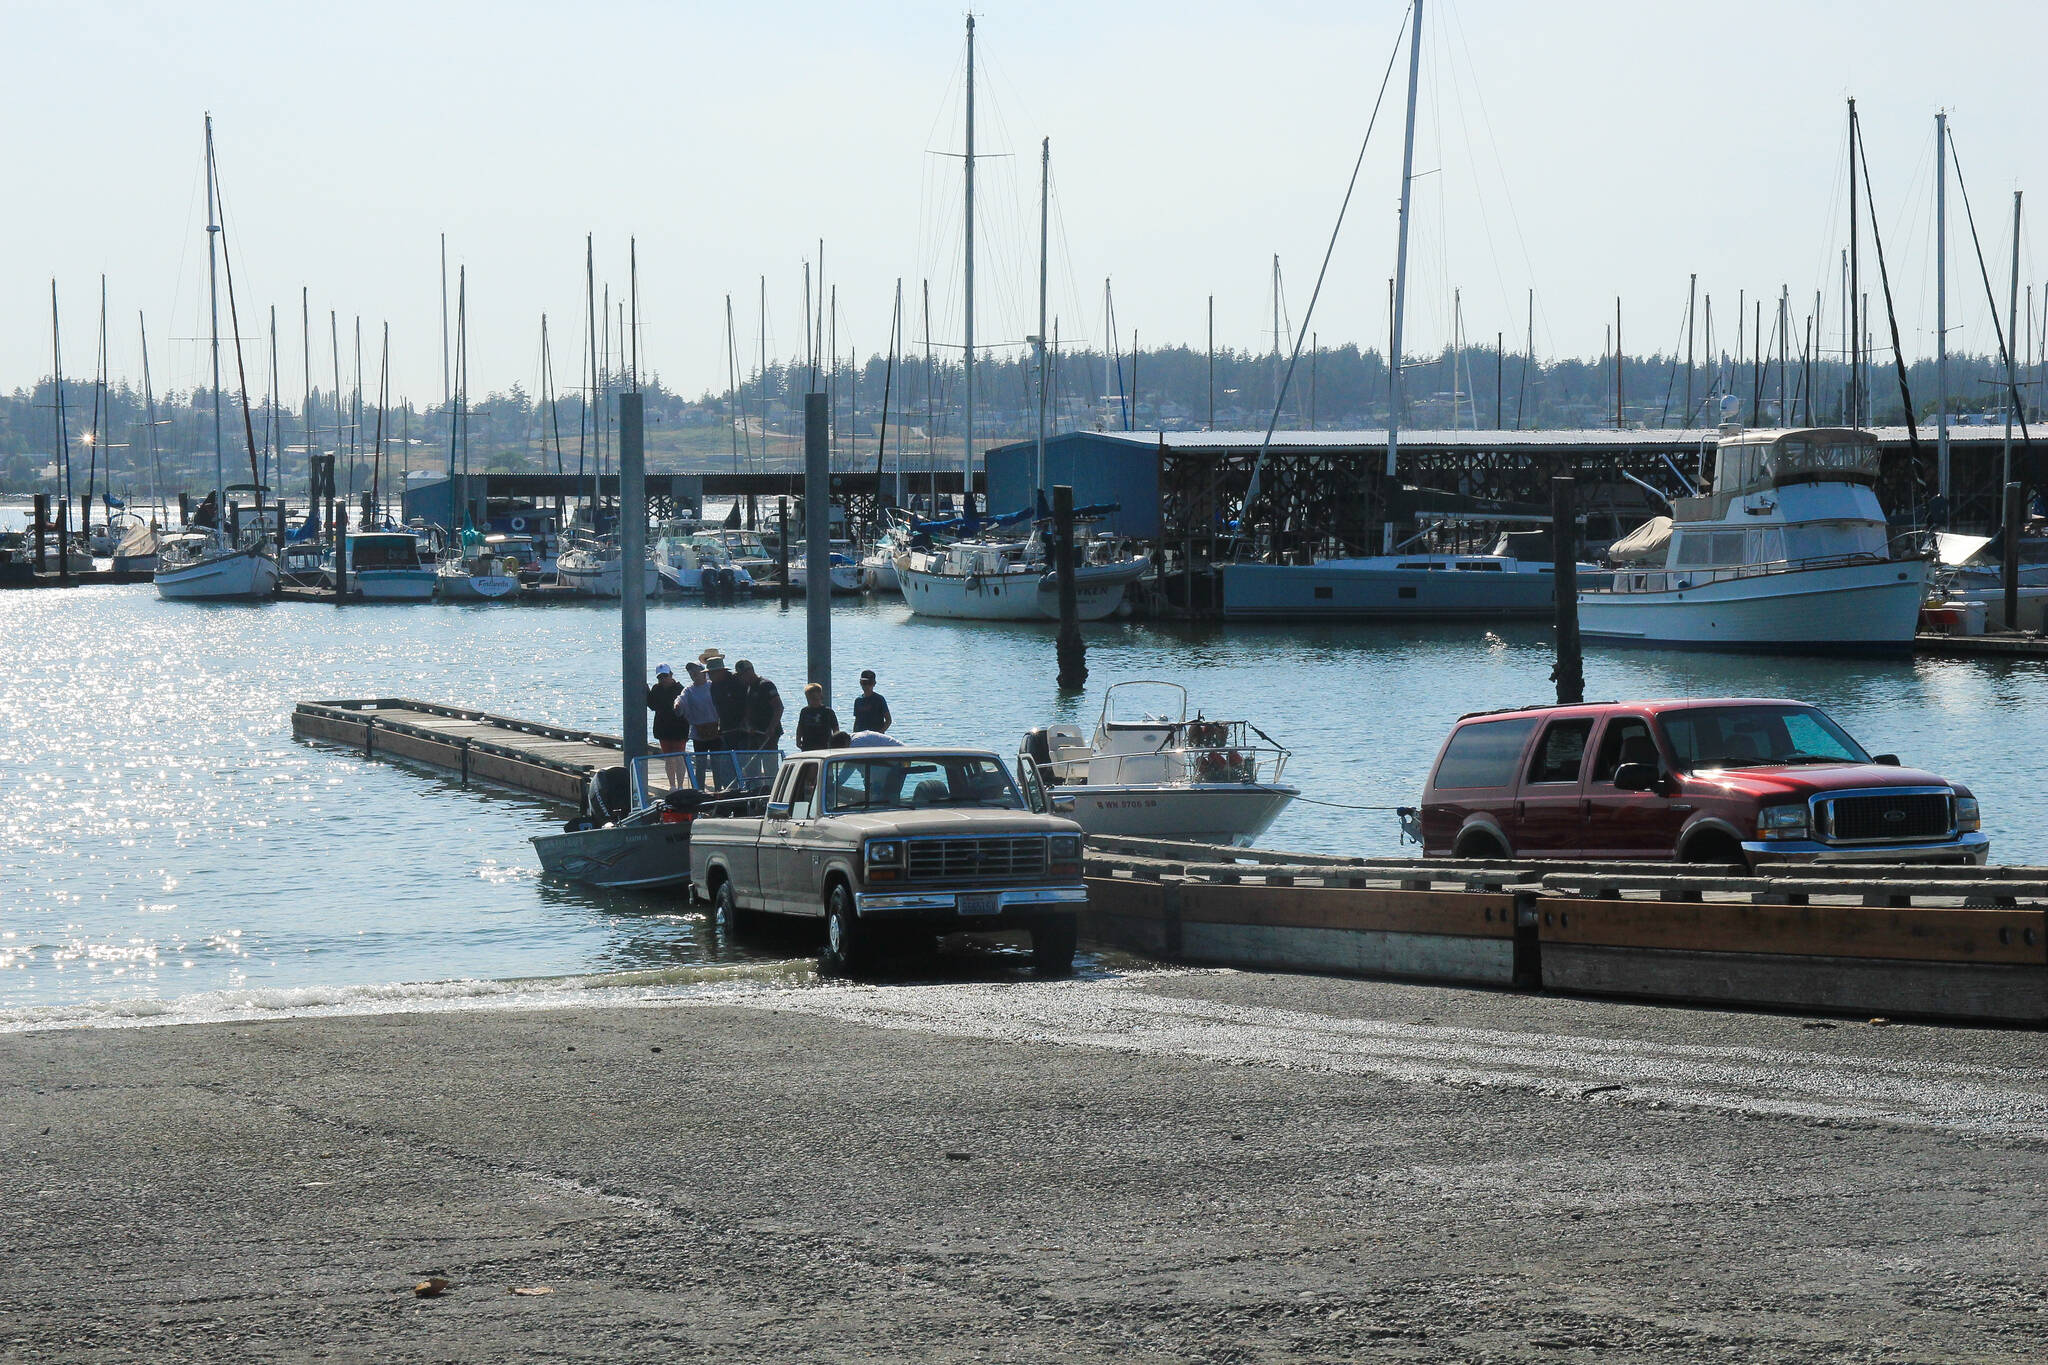 Crabbers prepare to pull their boats out of the water with the help of the new ramp float. (Photo by Luisa Loi)